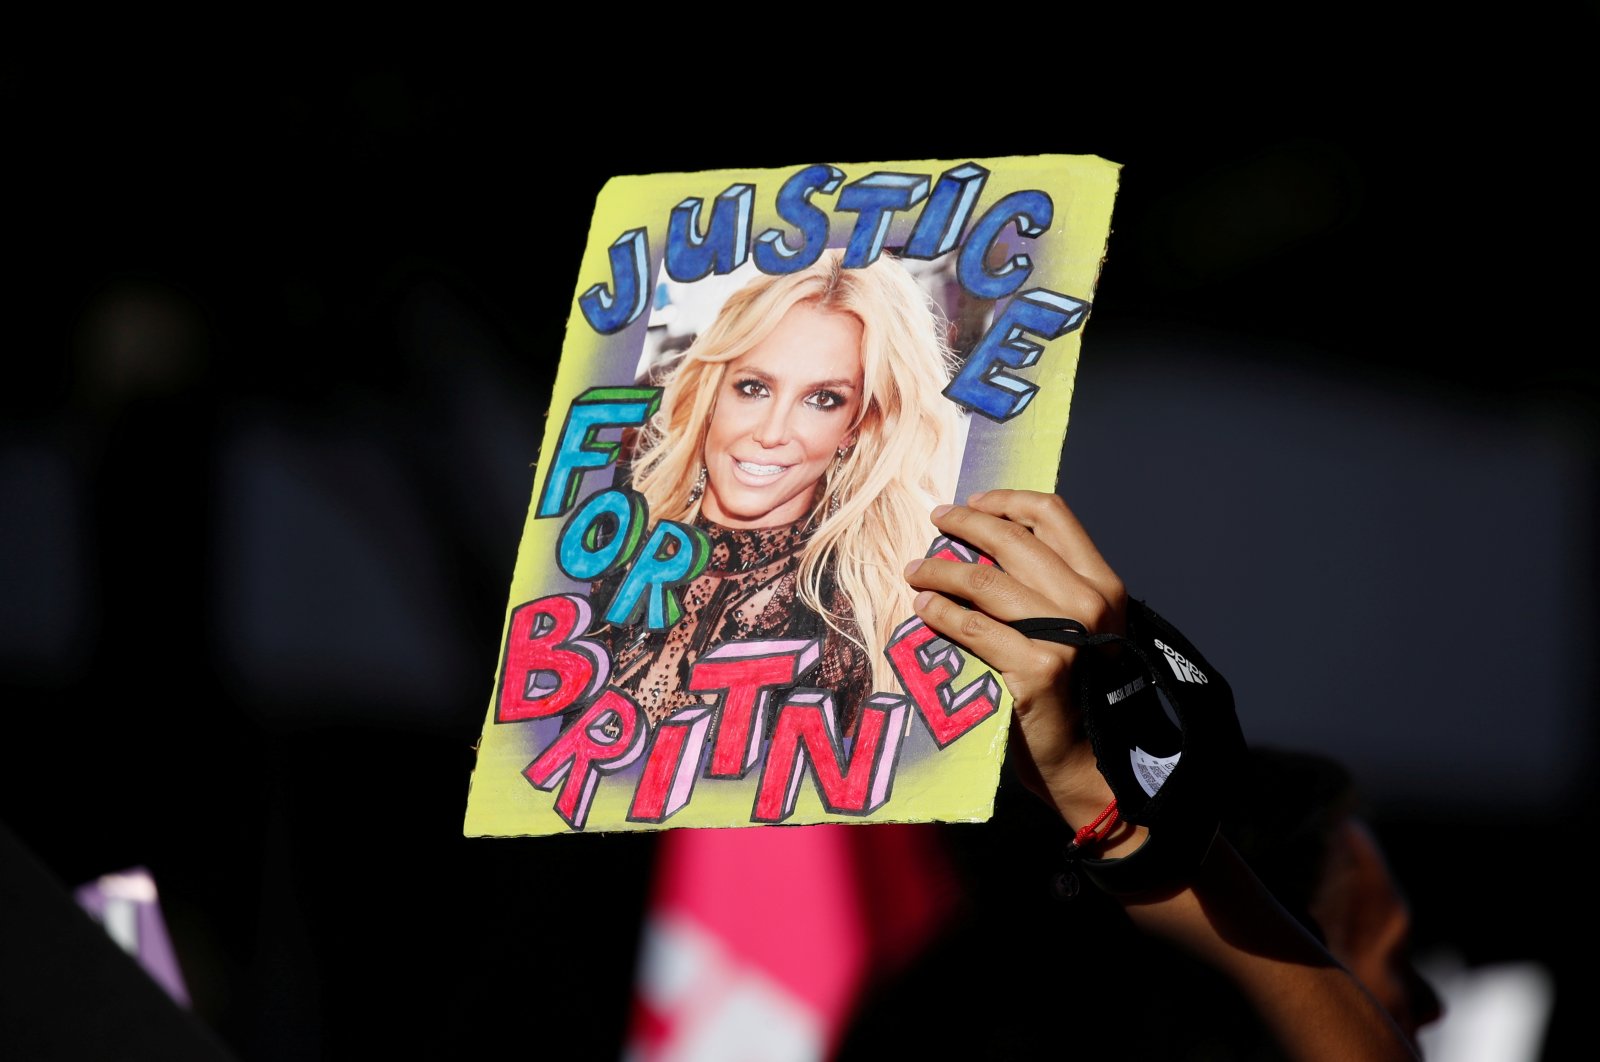 A supporter of singer Britney Spears holds up a picture of the pop star with the words "Justice for Britney" during celebrations of the termination of her conservatorship, outside the Stanley Mosk Courthouse in Los Angeles, California, U.S. Nov. 12, 2021. (REUTERS)